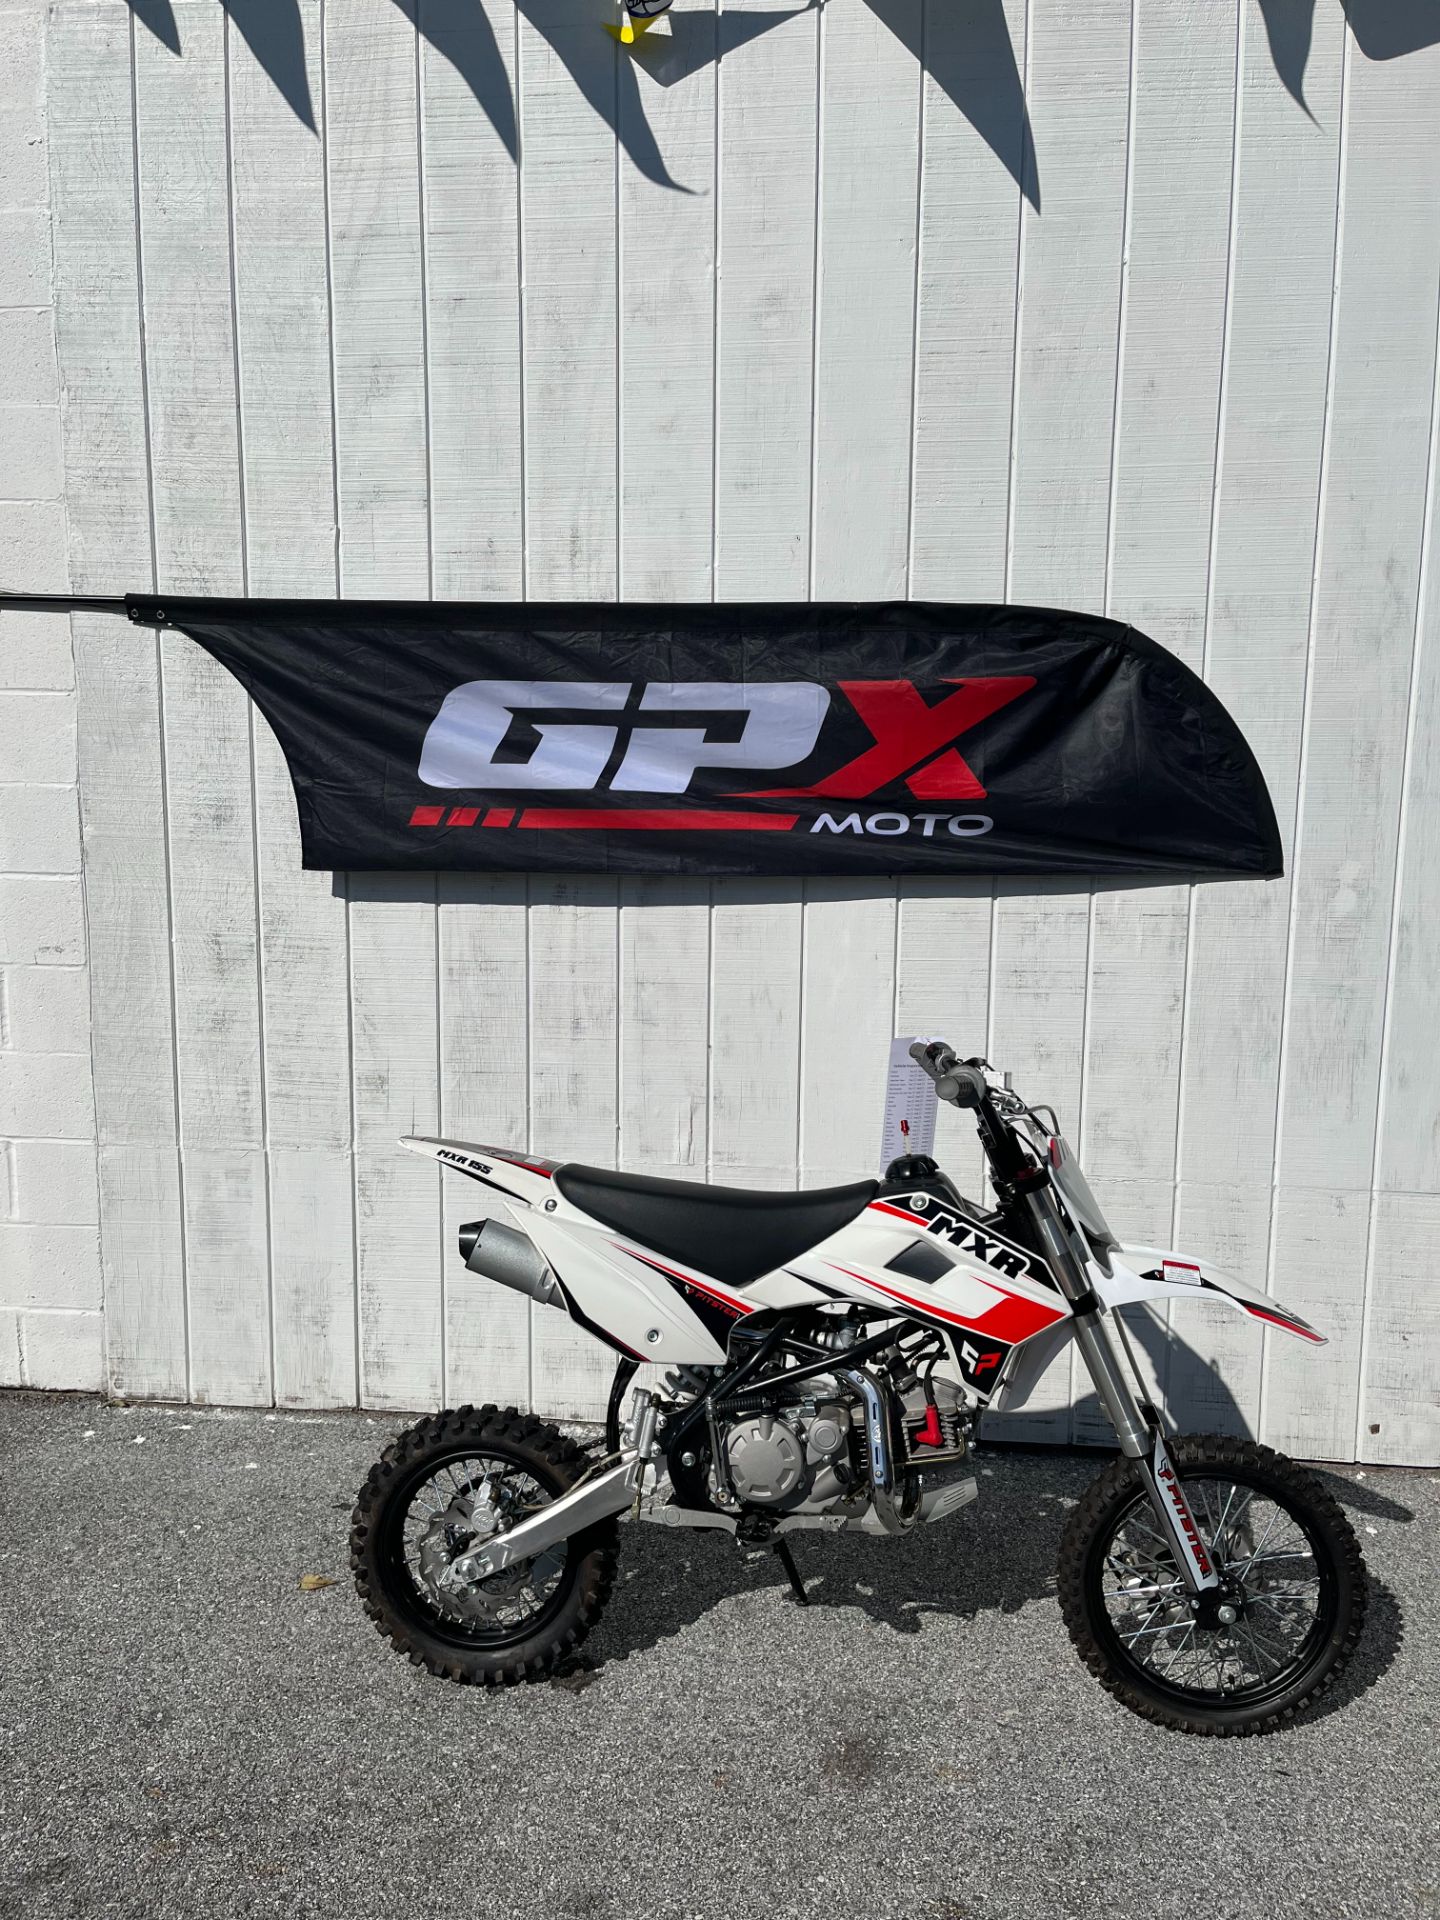 2021 Pitster Pro MXR155 in West Chester, Pennsylvania - Photo 1